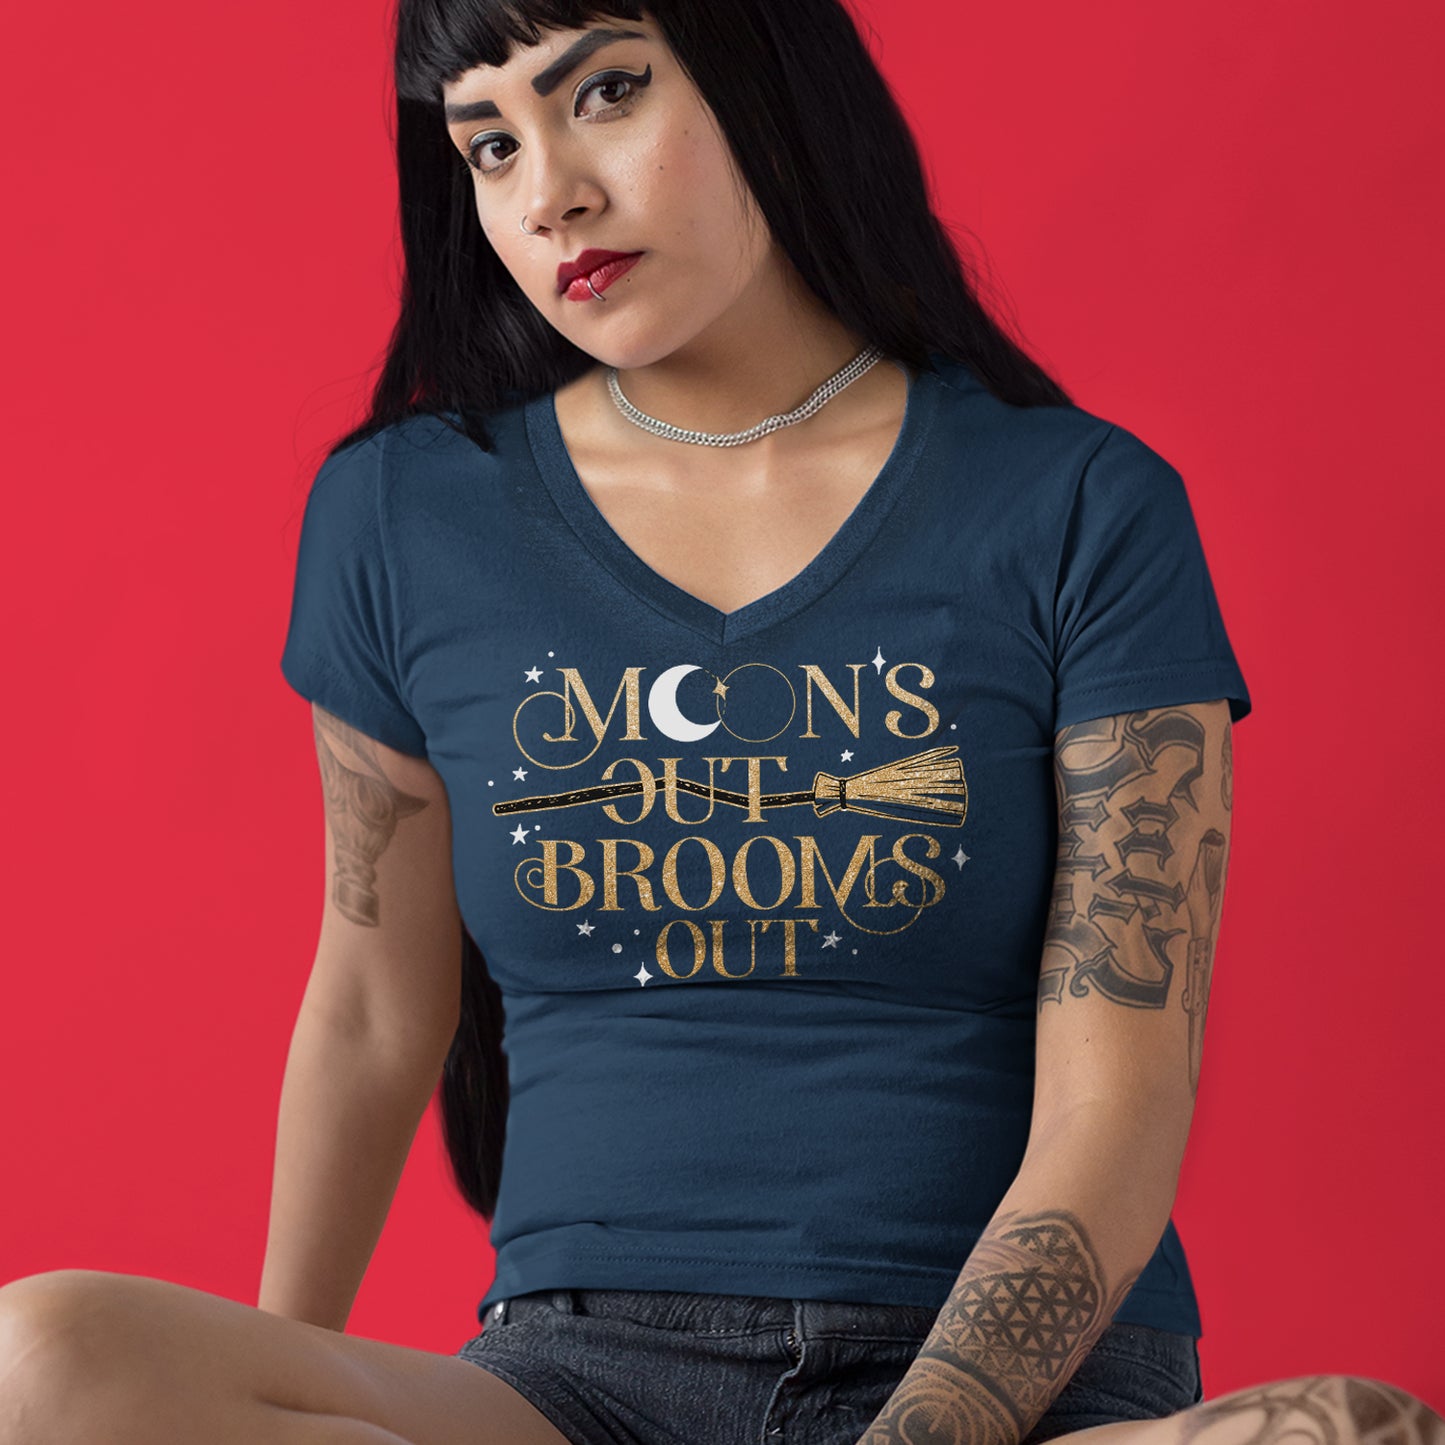 A female model wearing a dark navy, short-sleeved, V-neck tee with a gold print reading "Moon's Out Brooms Out". There is a gold broom going through the first "Out" and small white stars dotting the print space. The first "O" in "Moon" contains a white crescent moon. Behind the model is a red background.